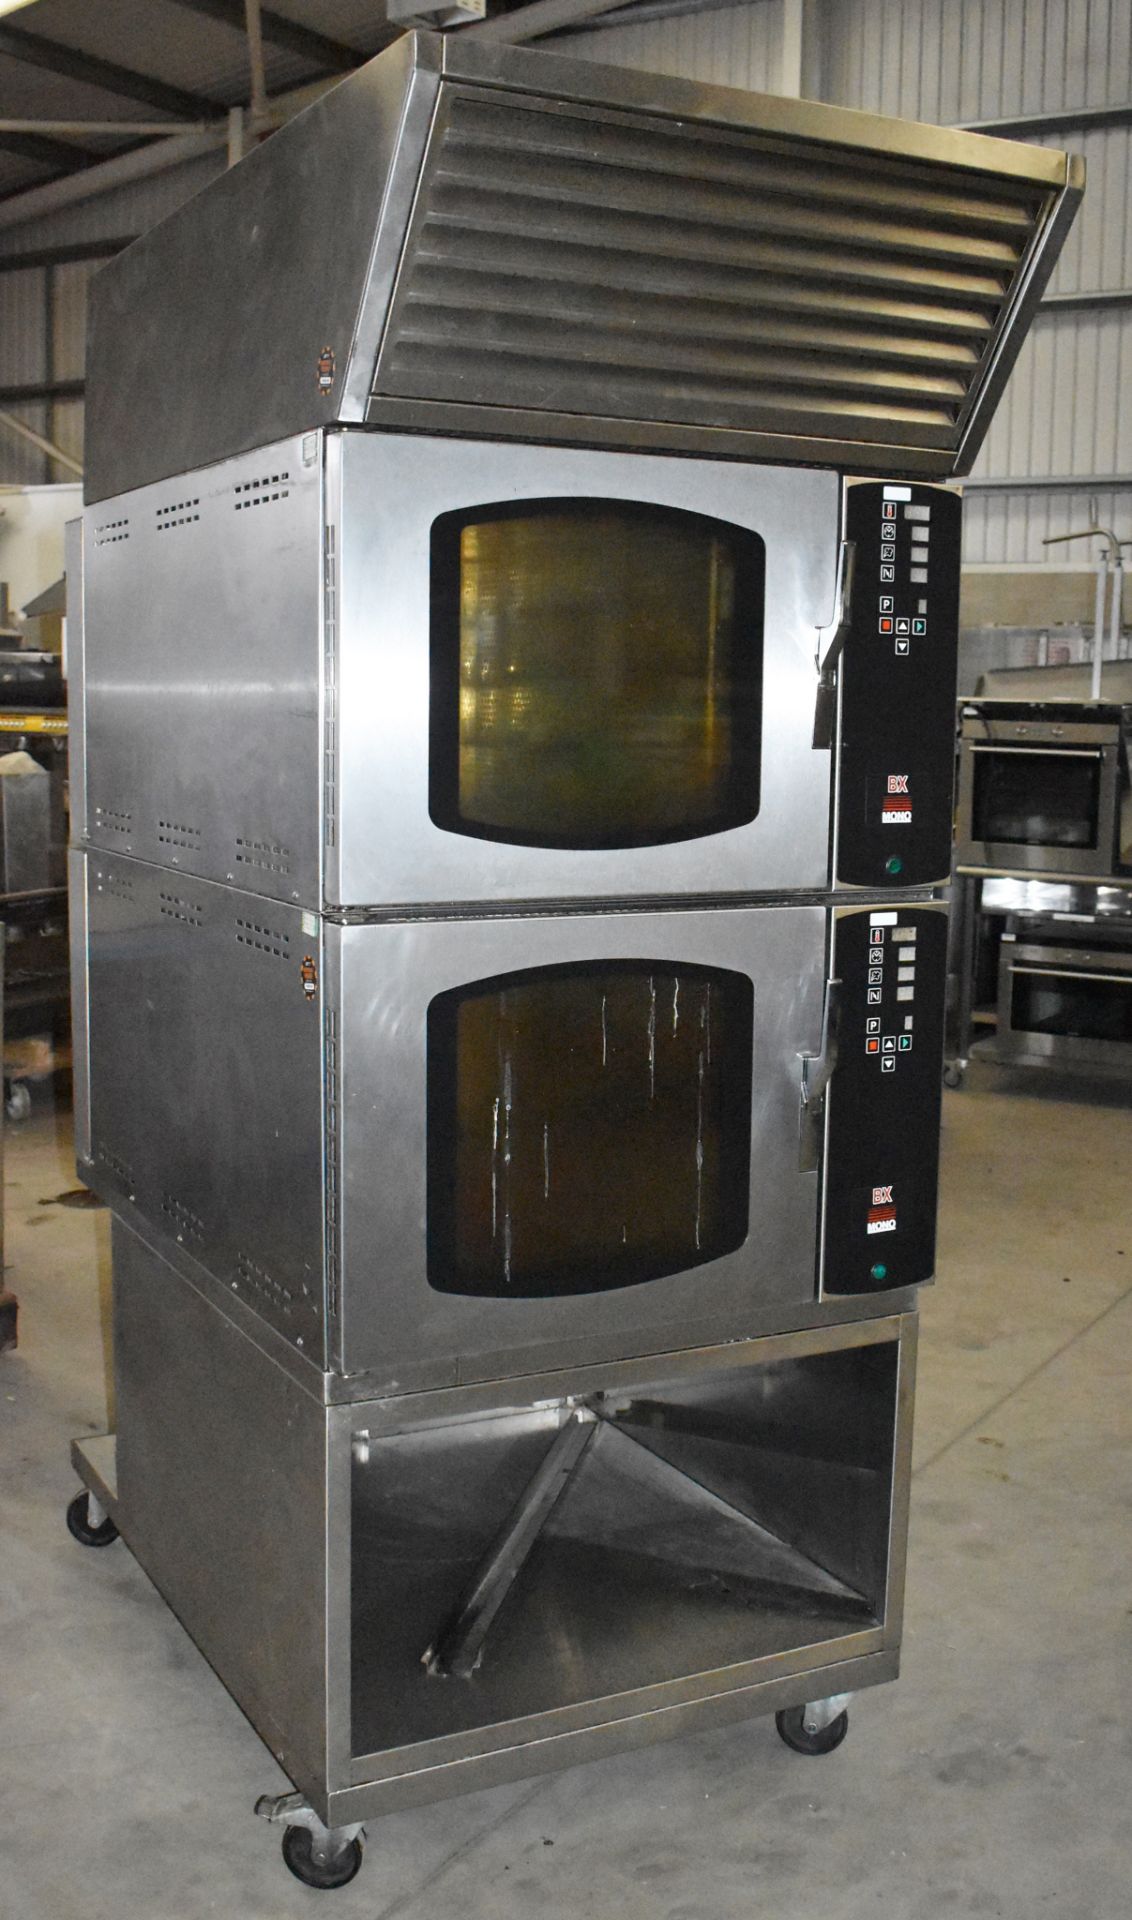 1 x Mono Double Classic and Steam BX Convection Oven - Model FG159C - 3 Phase Power - H210 x W83 x - Image 4 of 15